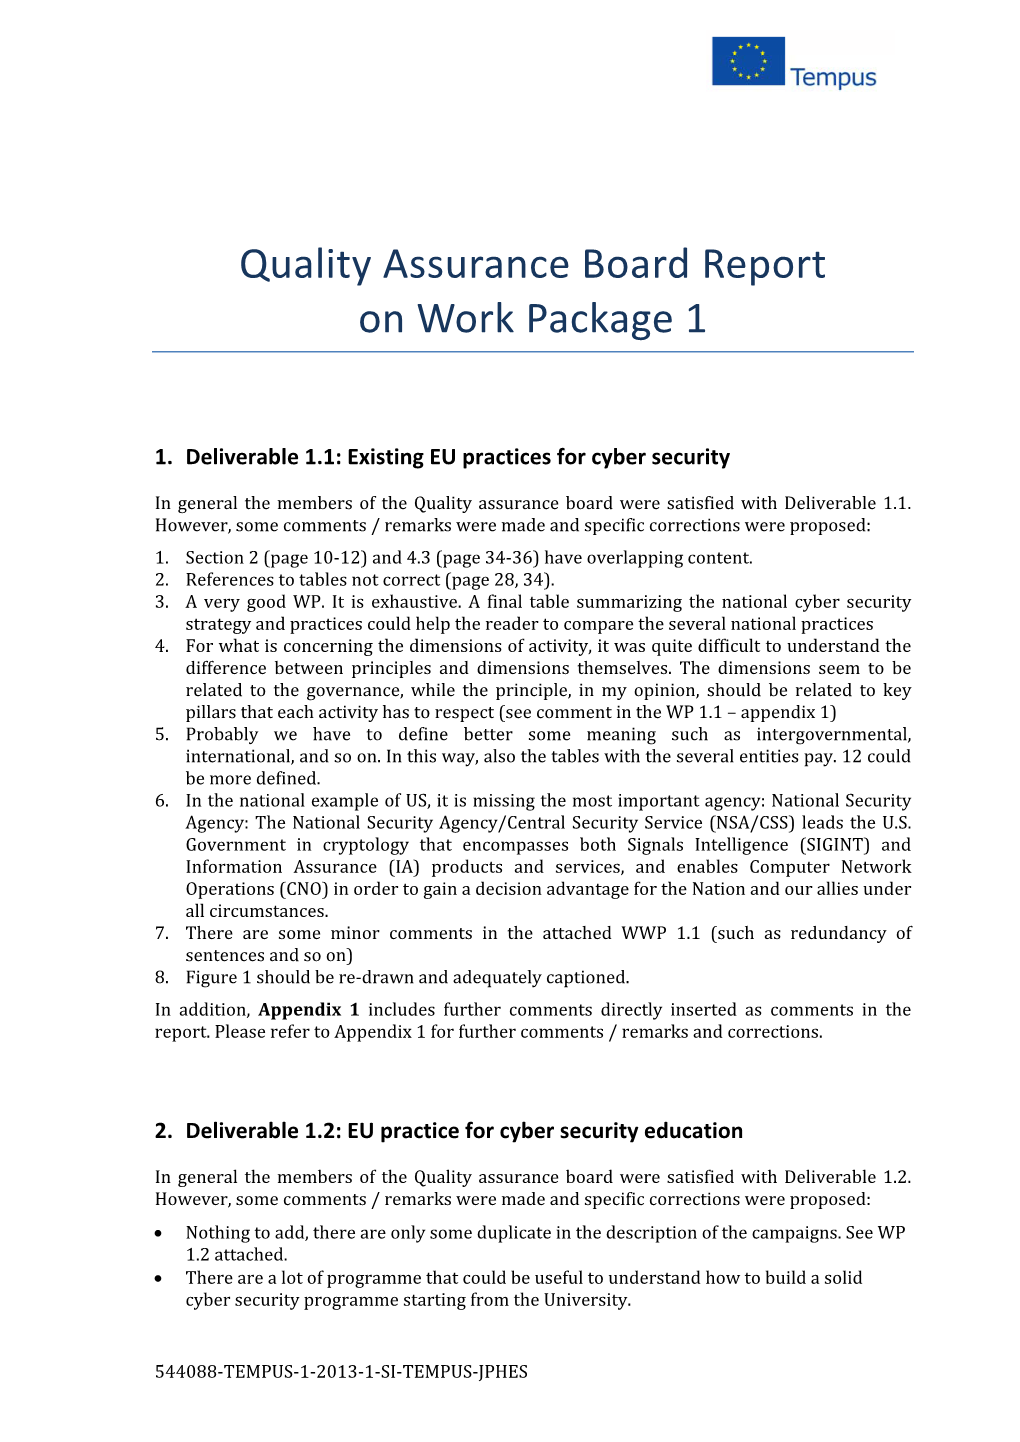 Quality Assurance Board Report on Work Package 1